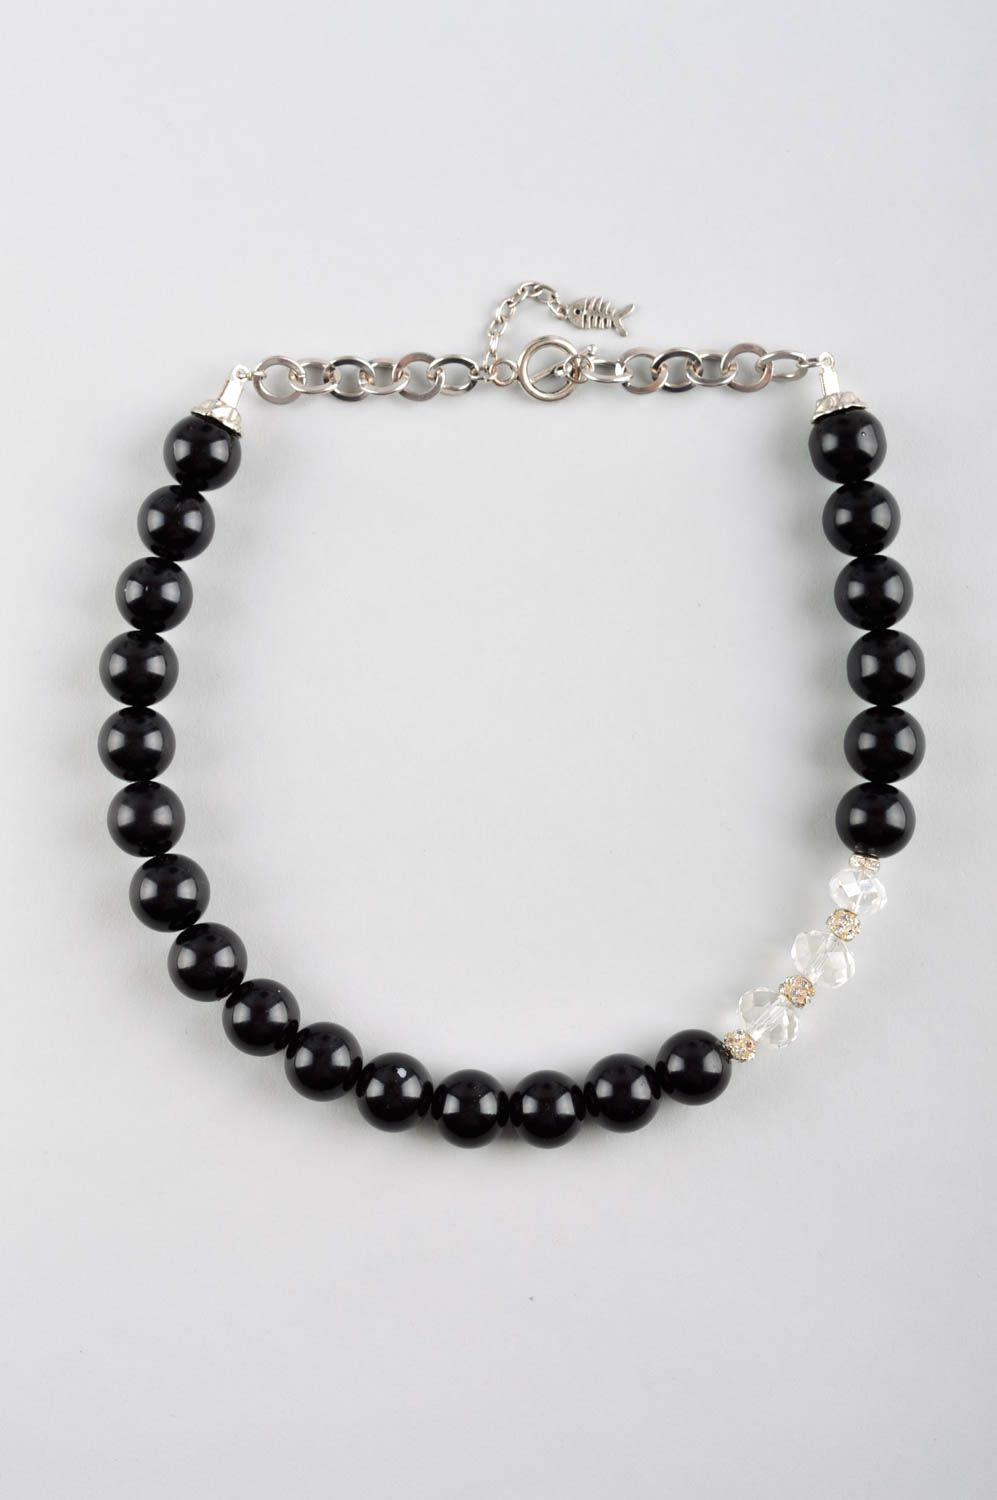 Handmade bead necklace pearl necklace black necklace for women gifts for girls photo 2